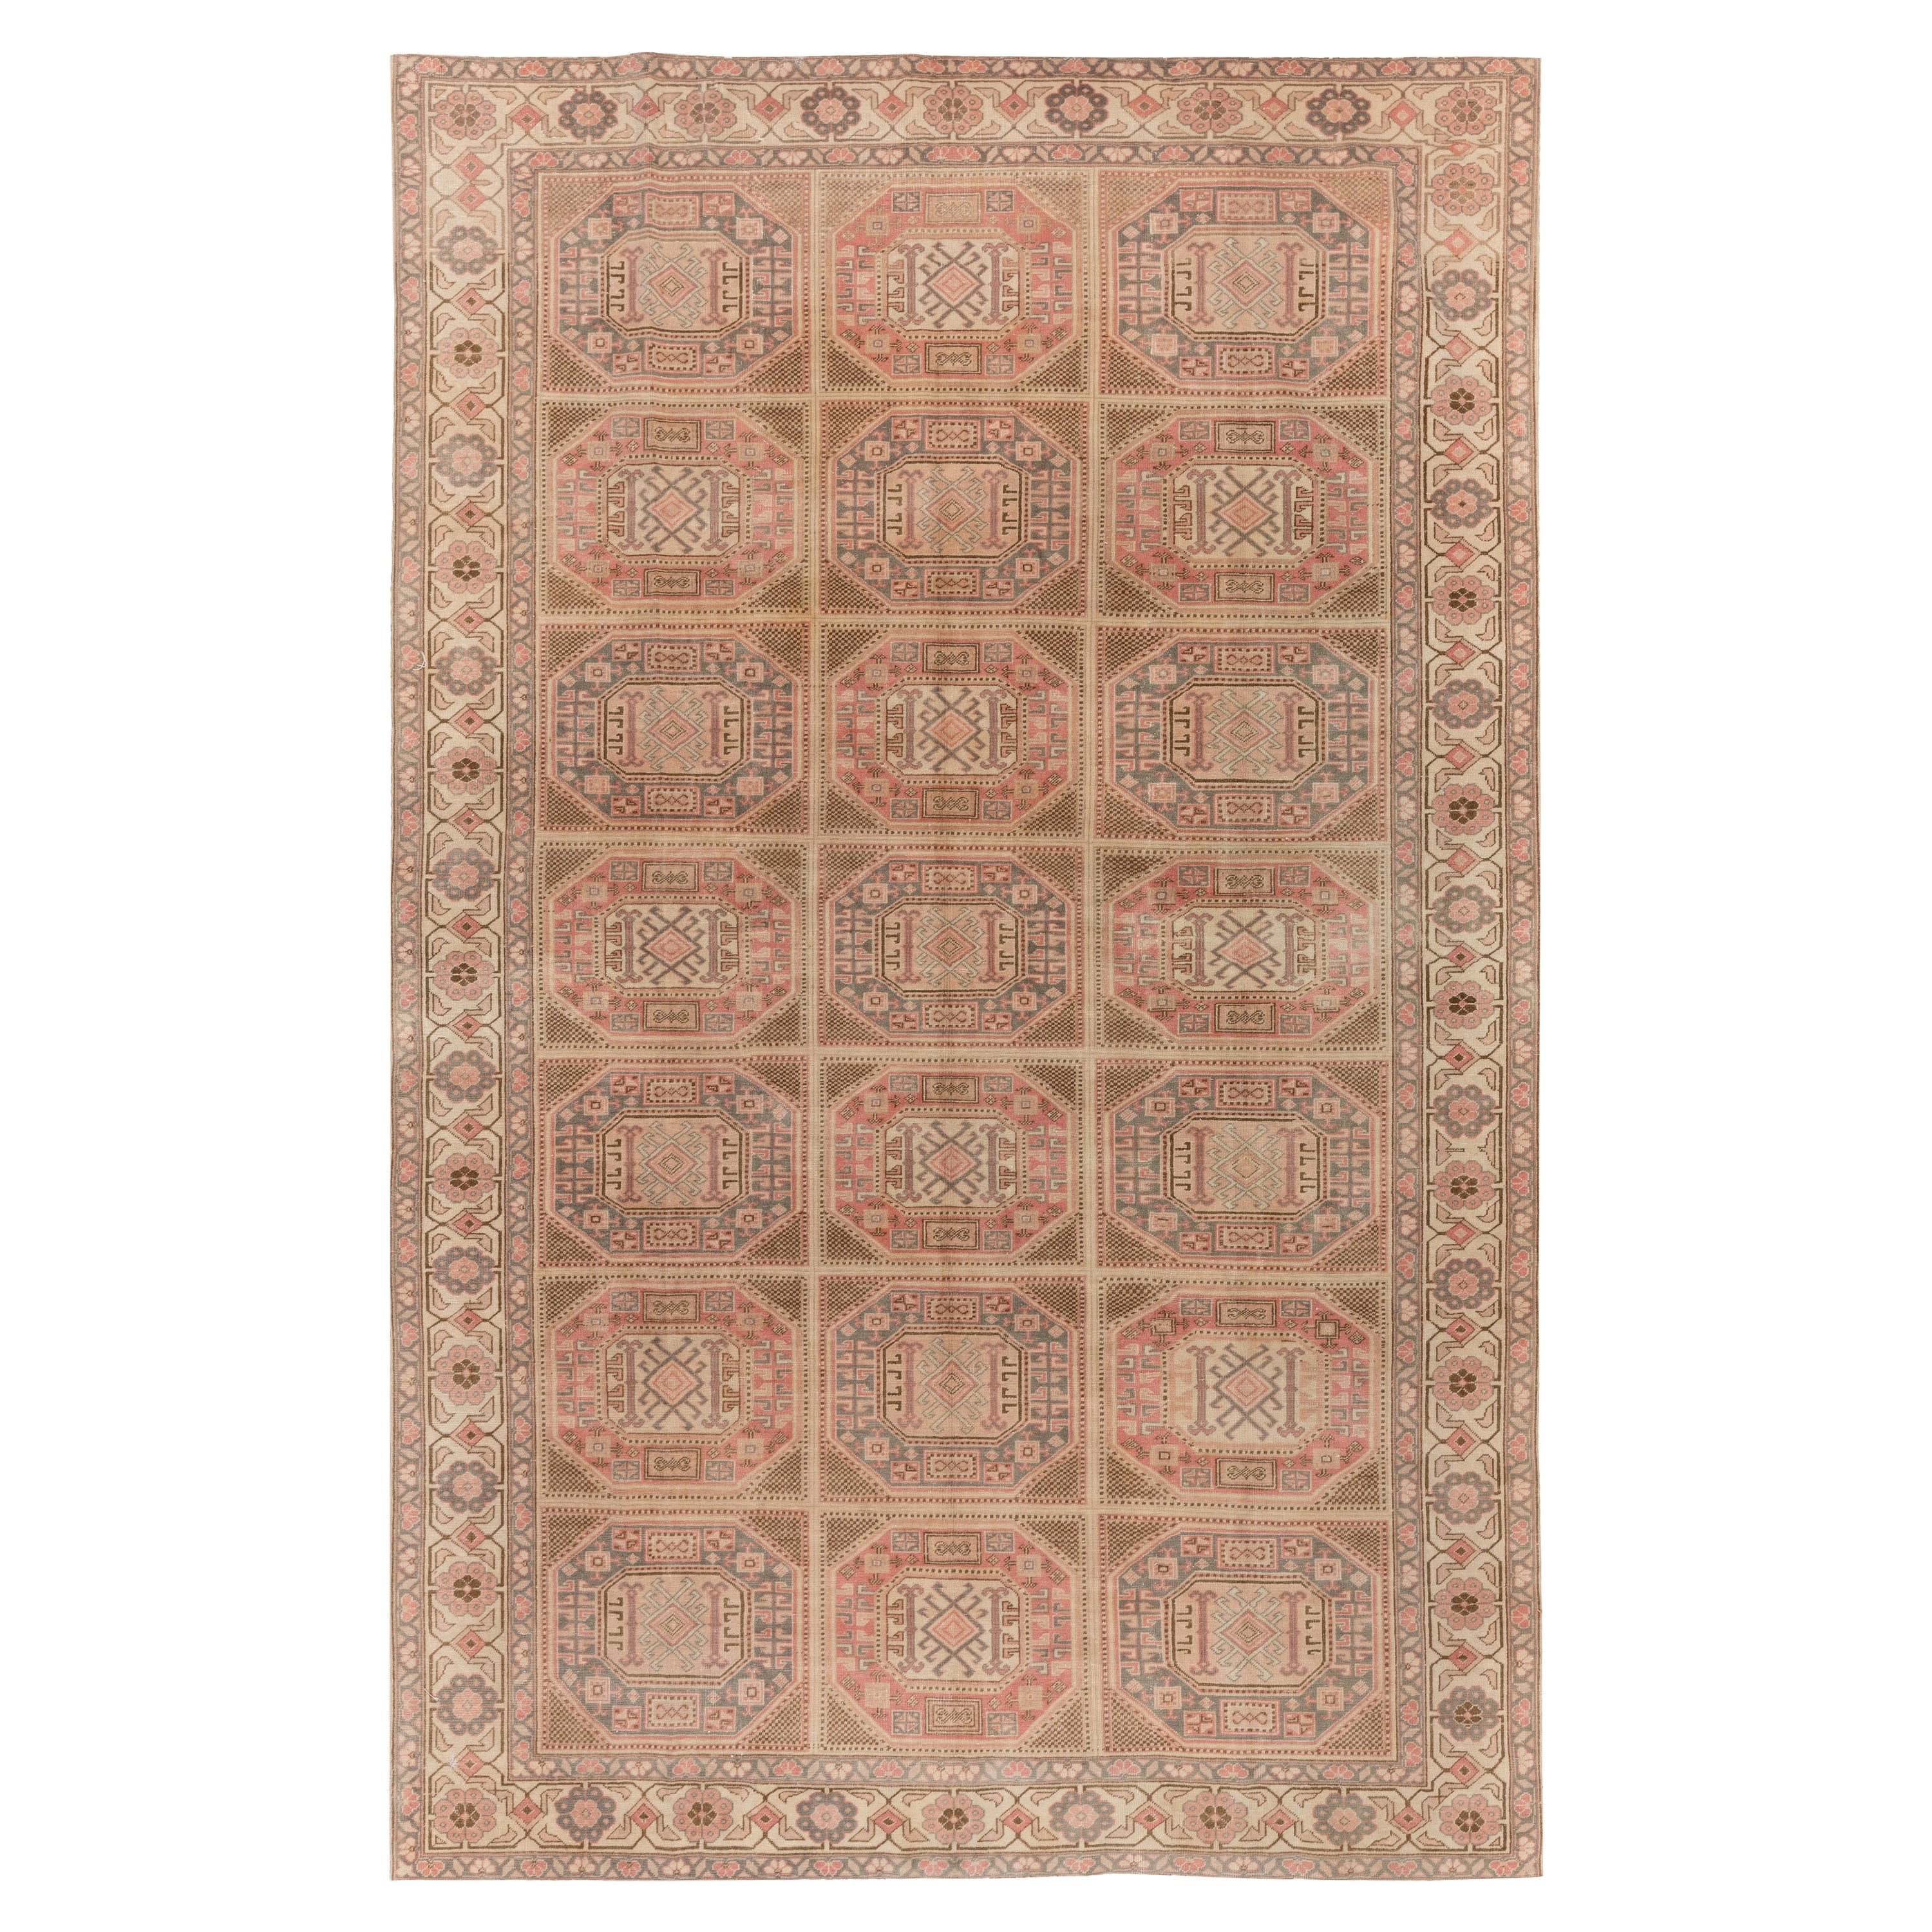 6.6x9.7 Ft Hand Knotted Vintage Turkish Kysari Rug. Muted Colors, Wool Pile For Sale